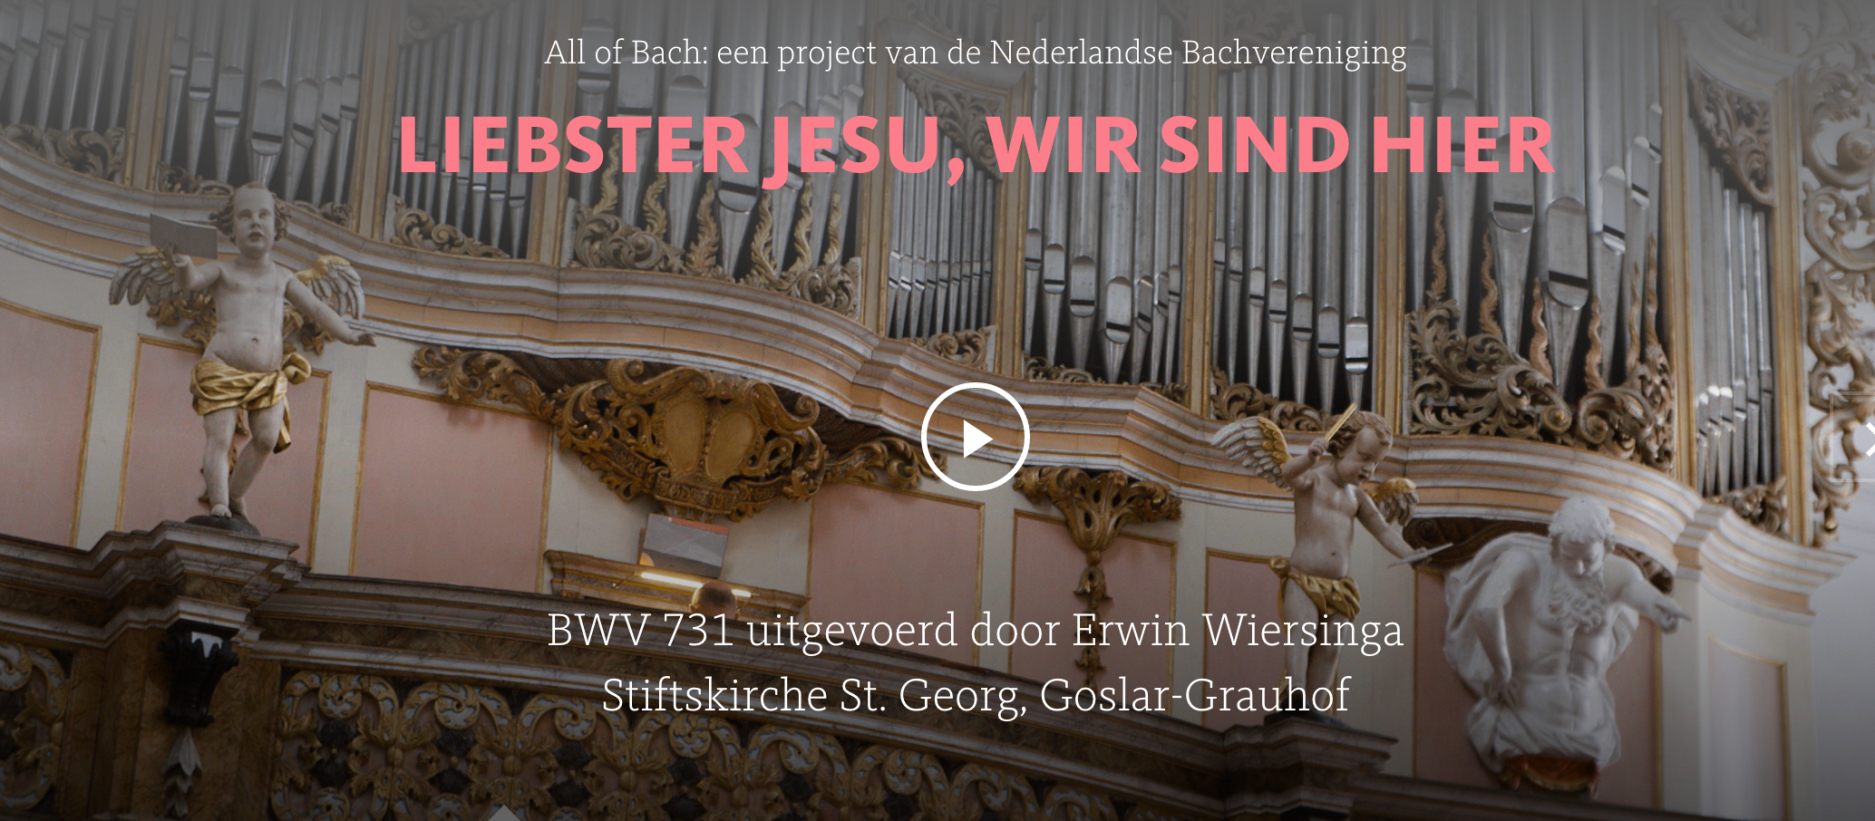 ALL OF BACH BWV 731